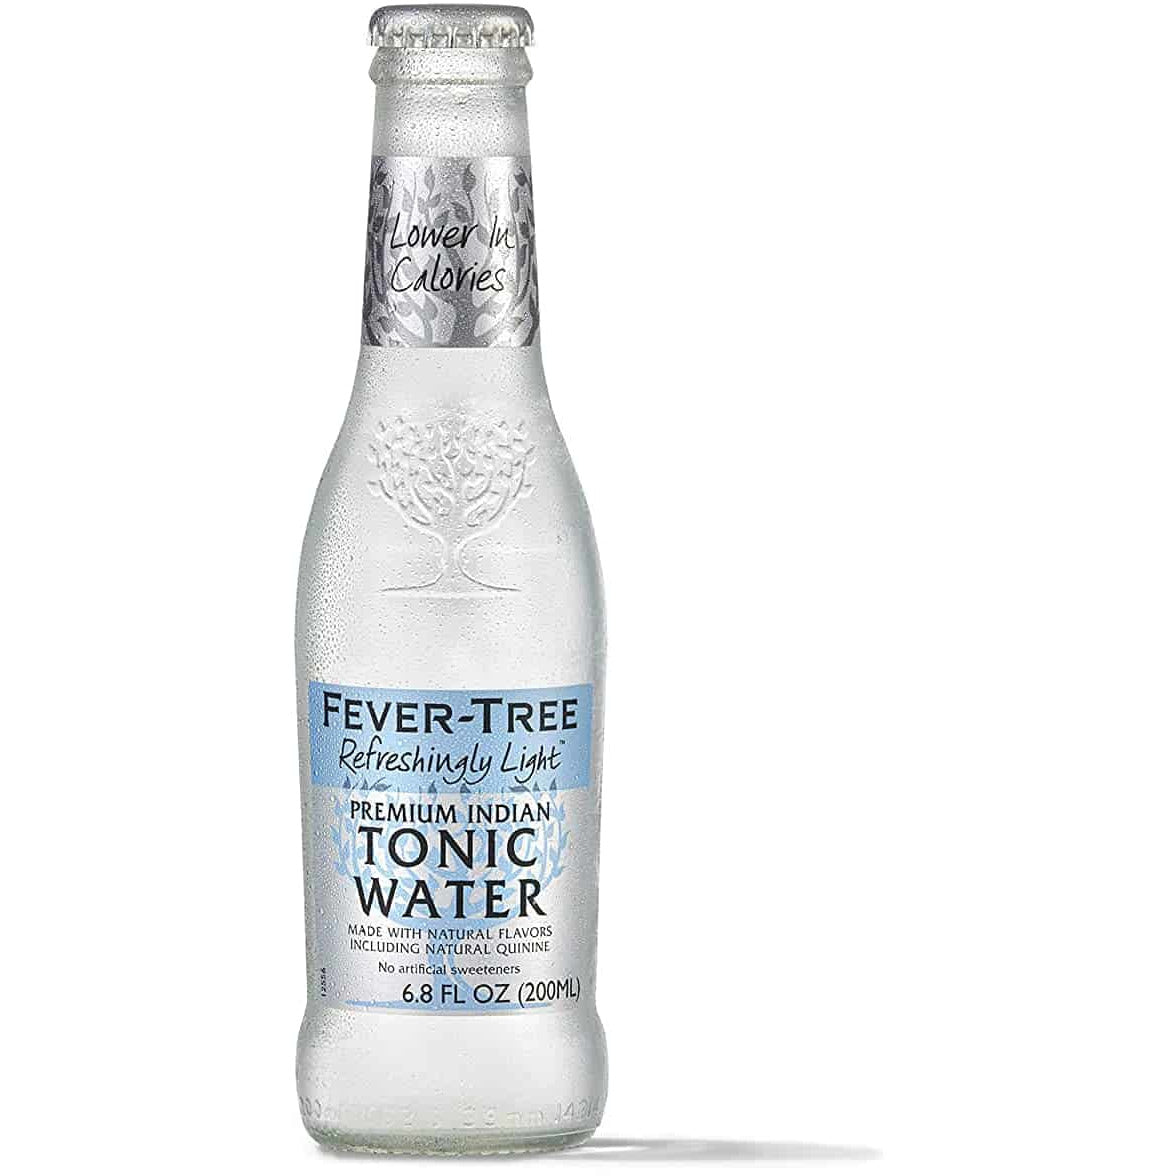 Fever-Tree Refreshingly Light Tonic Water - Case of 24